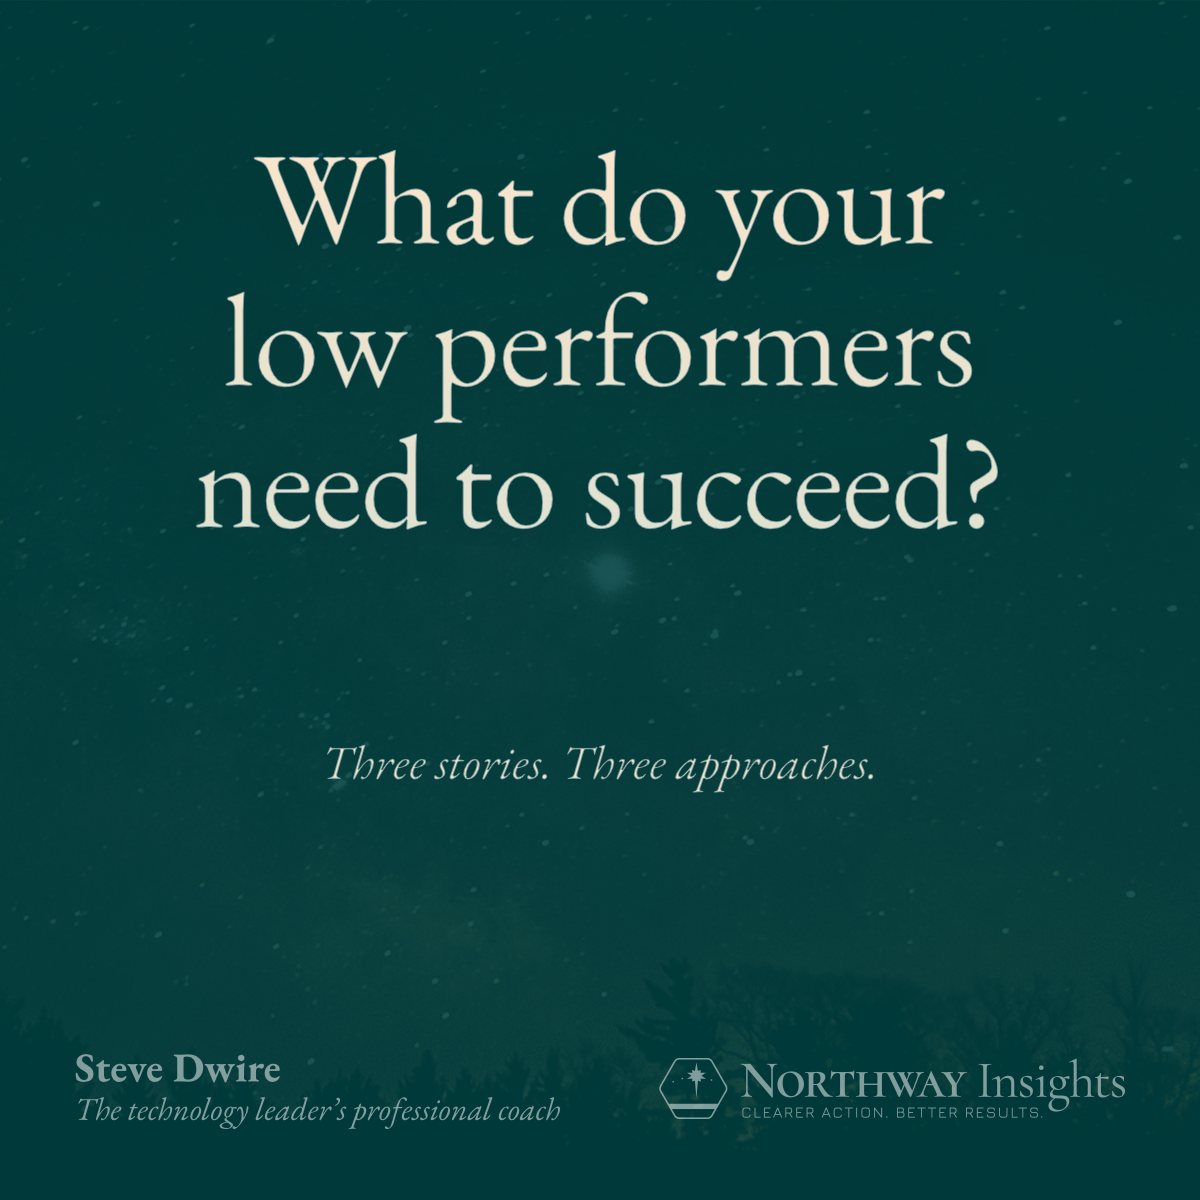 What do your low performers need to succeed?